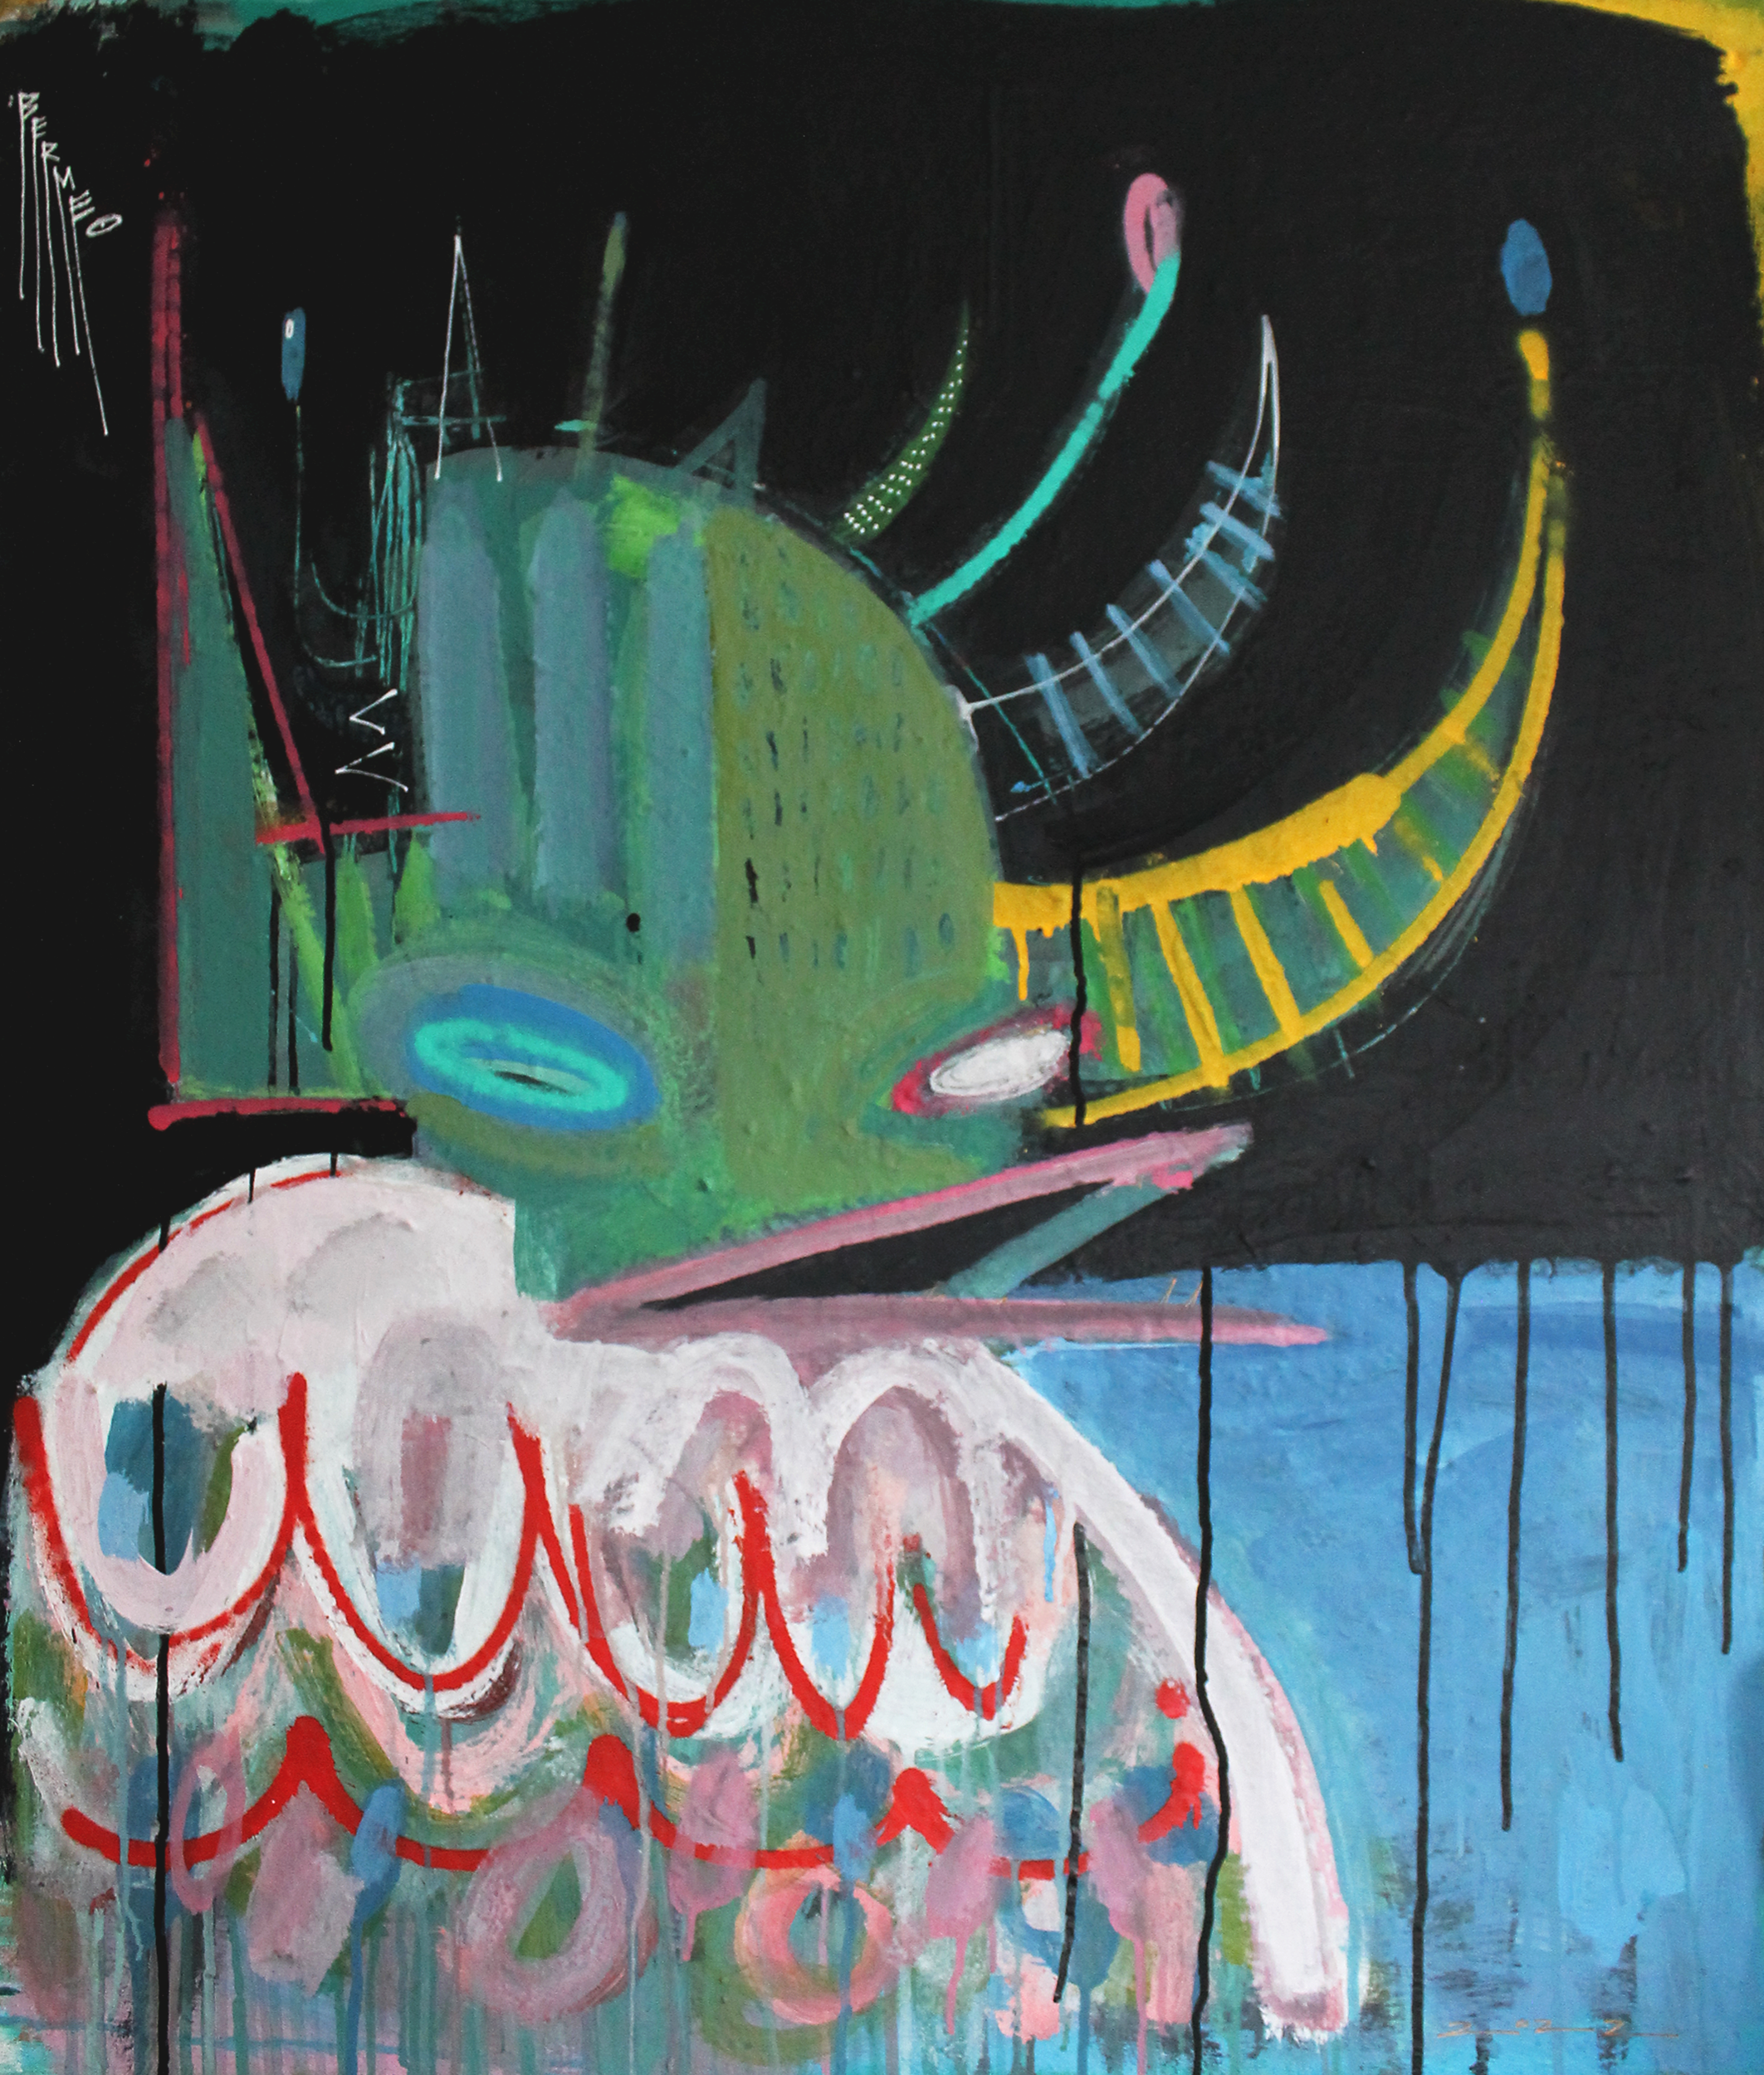   Vejigante Medianoche,  2022  36” x 30”   Acrylic, ink, spray paint and white-out on canvas     